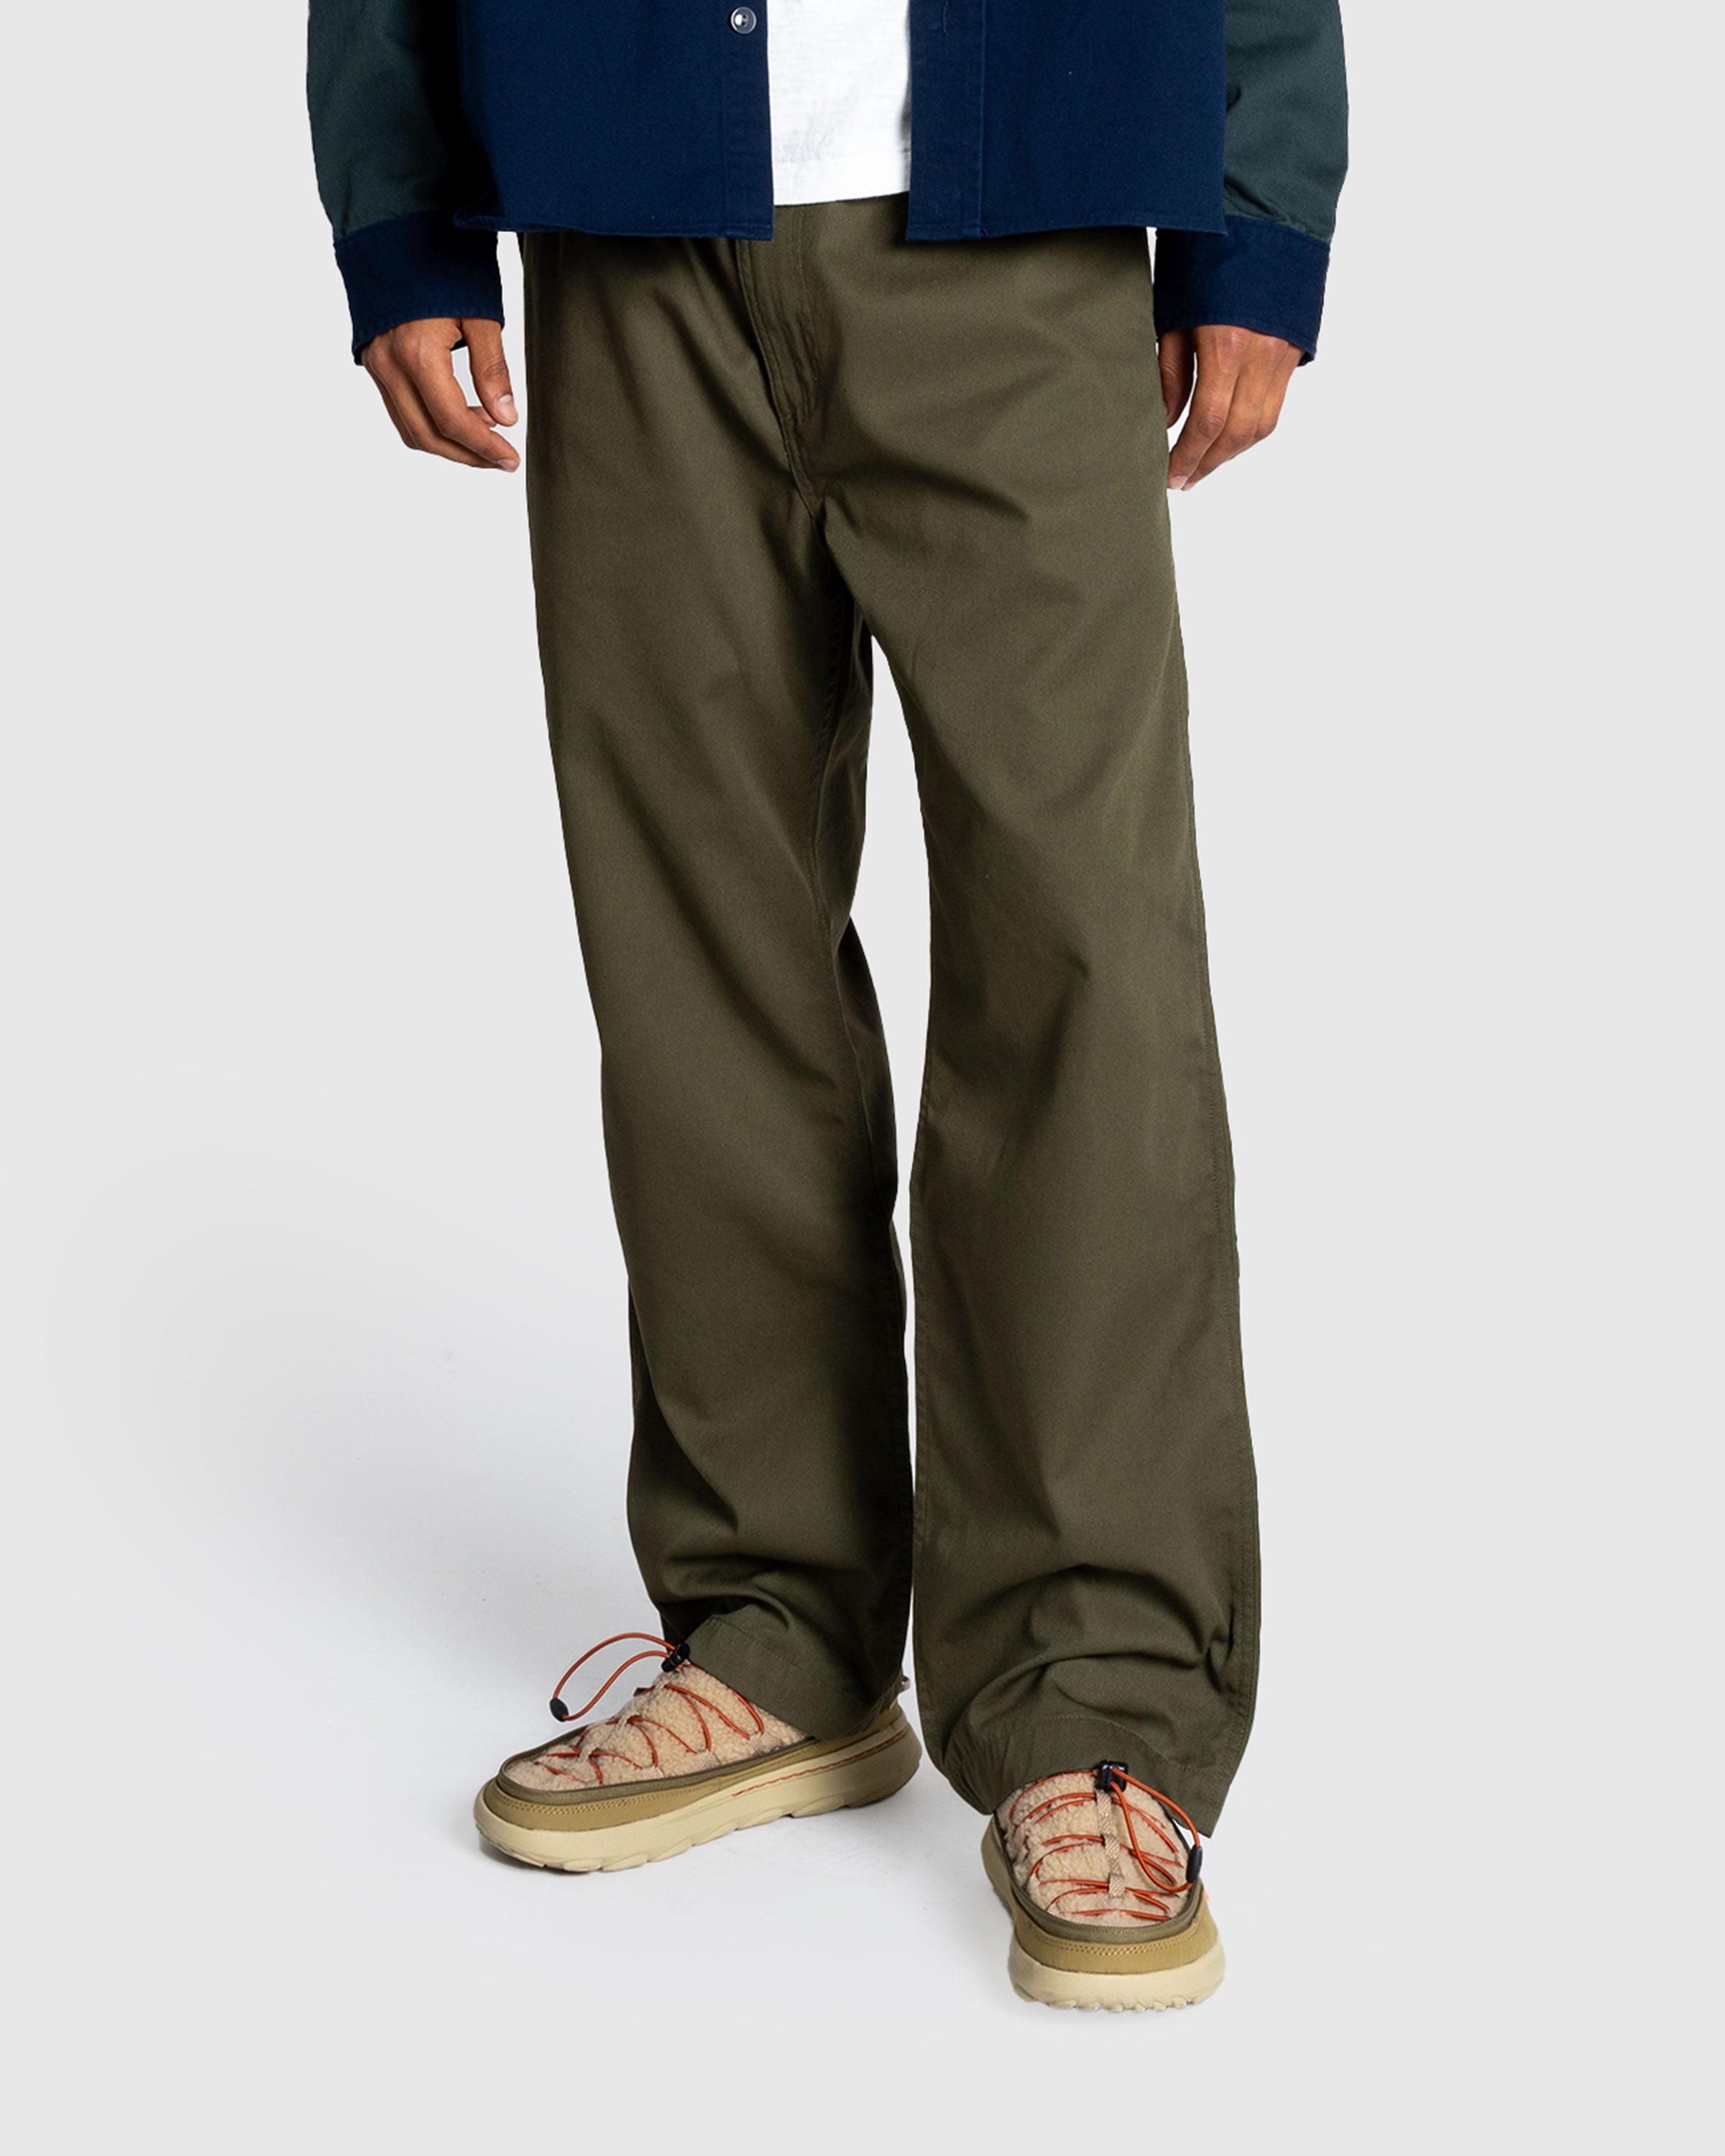 Human Made – Easy Pants Olive Drab - Trousers - Green - Image 2